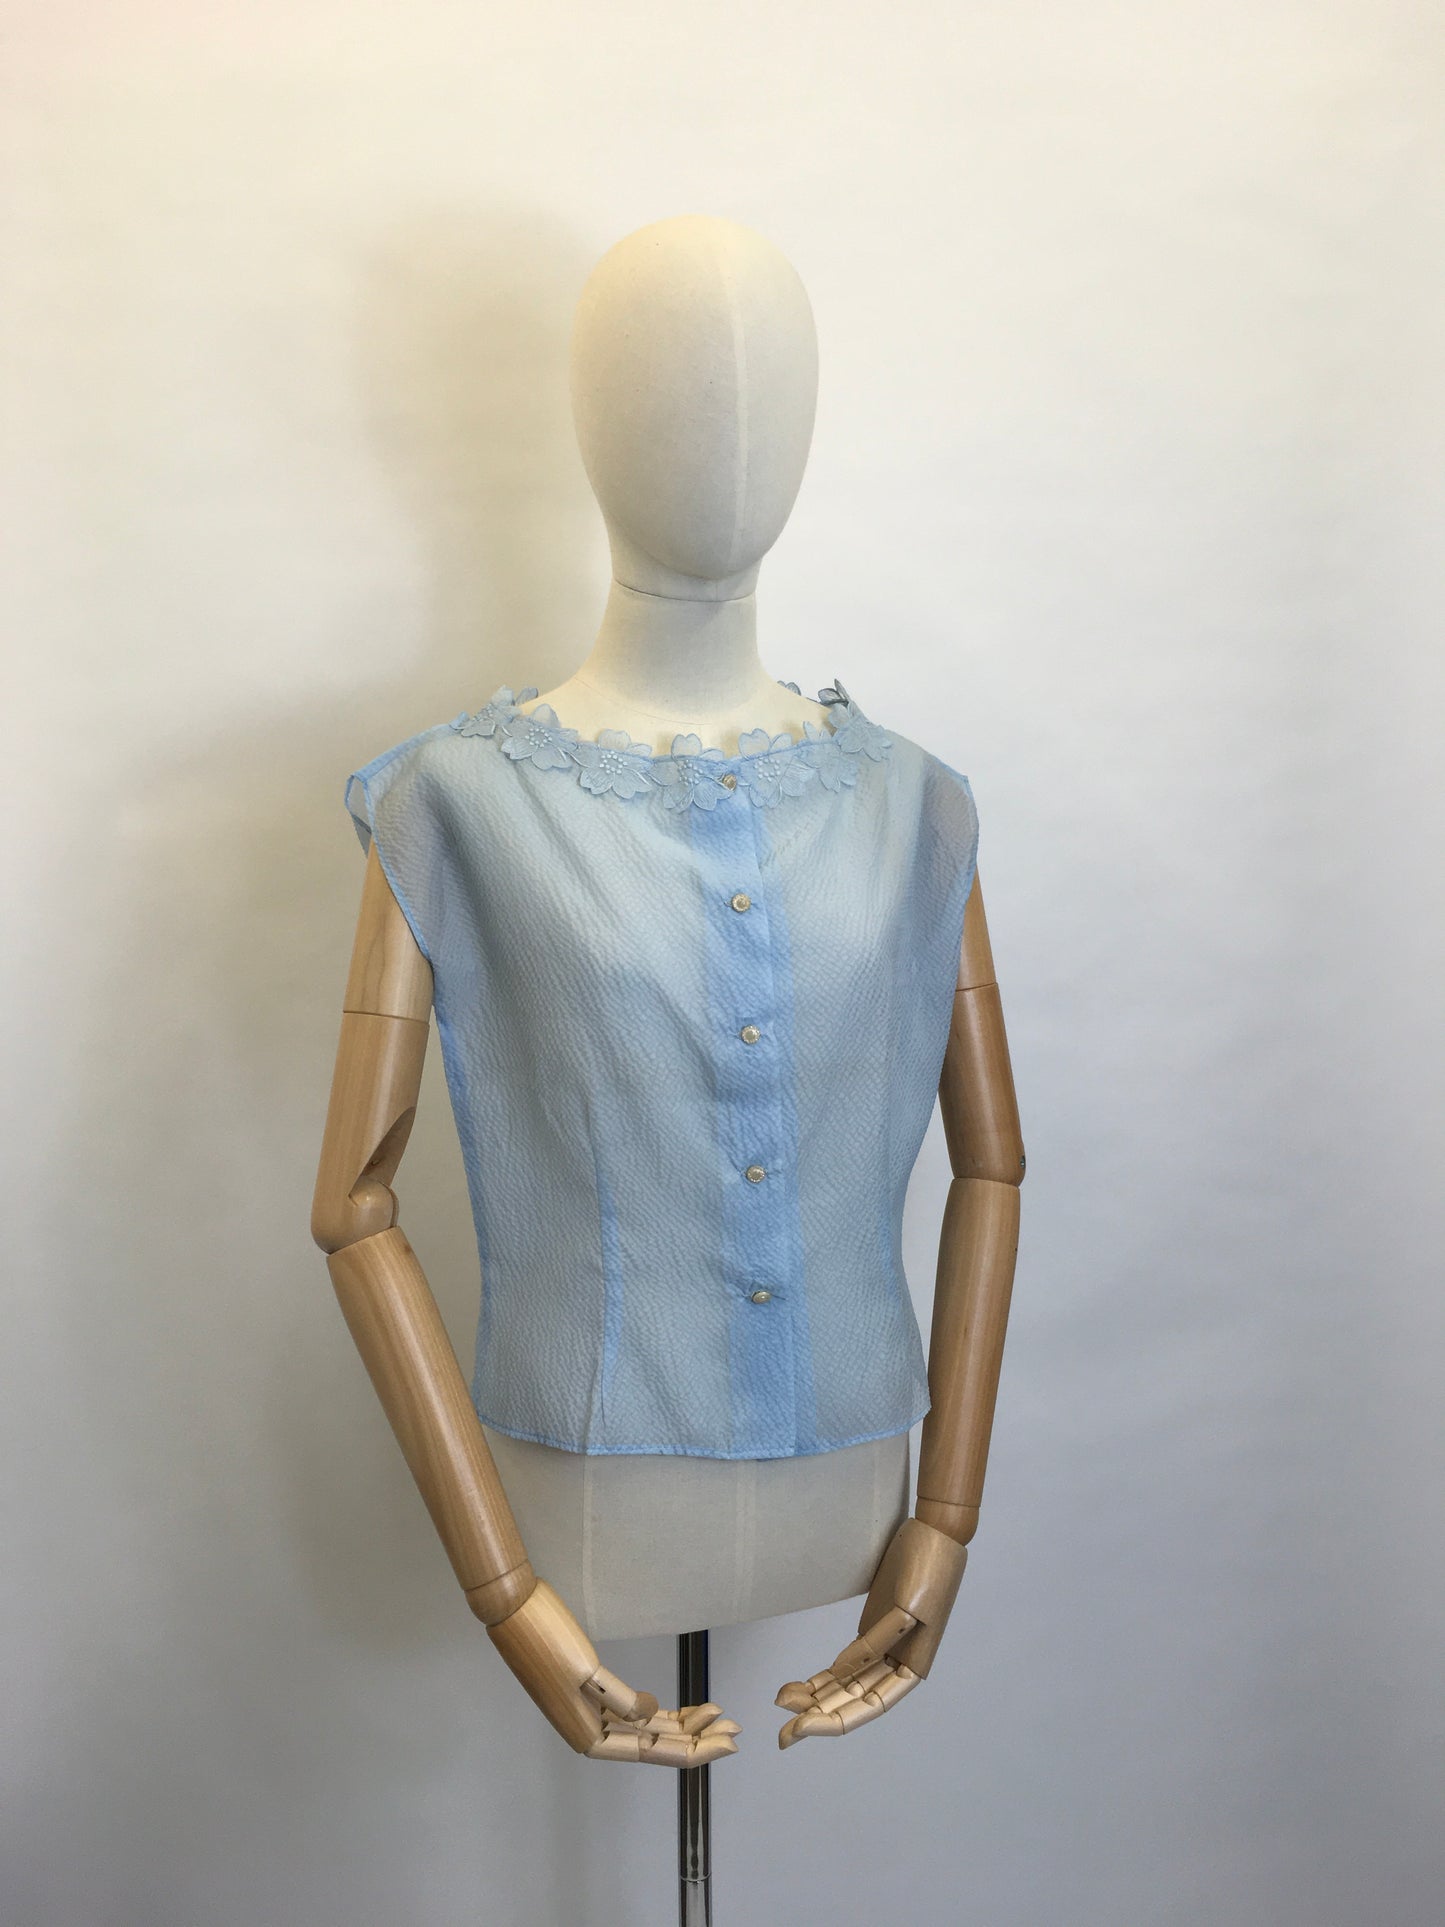 Original 1950’s Sheer Blouse in a lovely Powder Blue - Featuring Floral Detailing to the Neckline